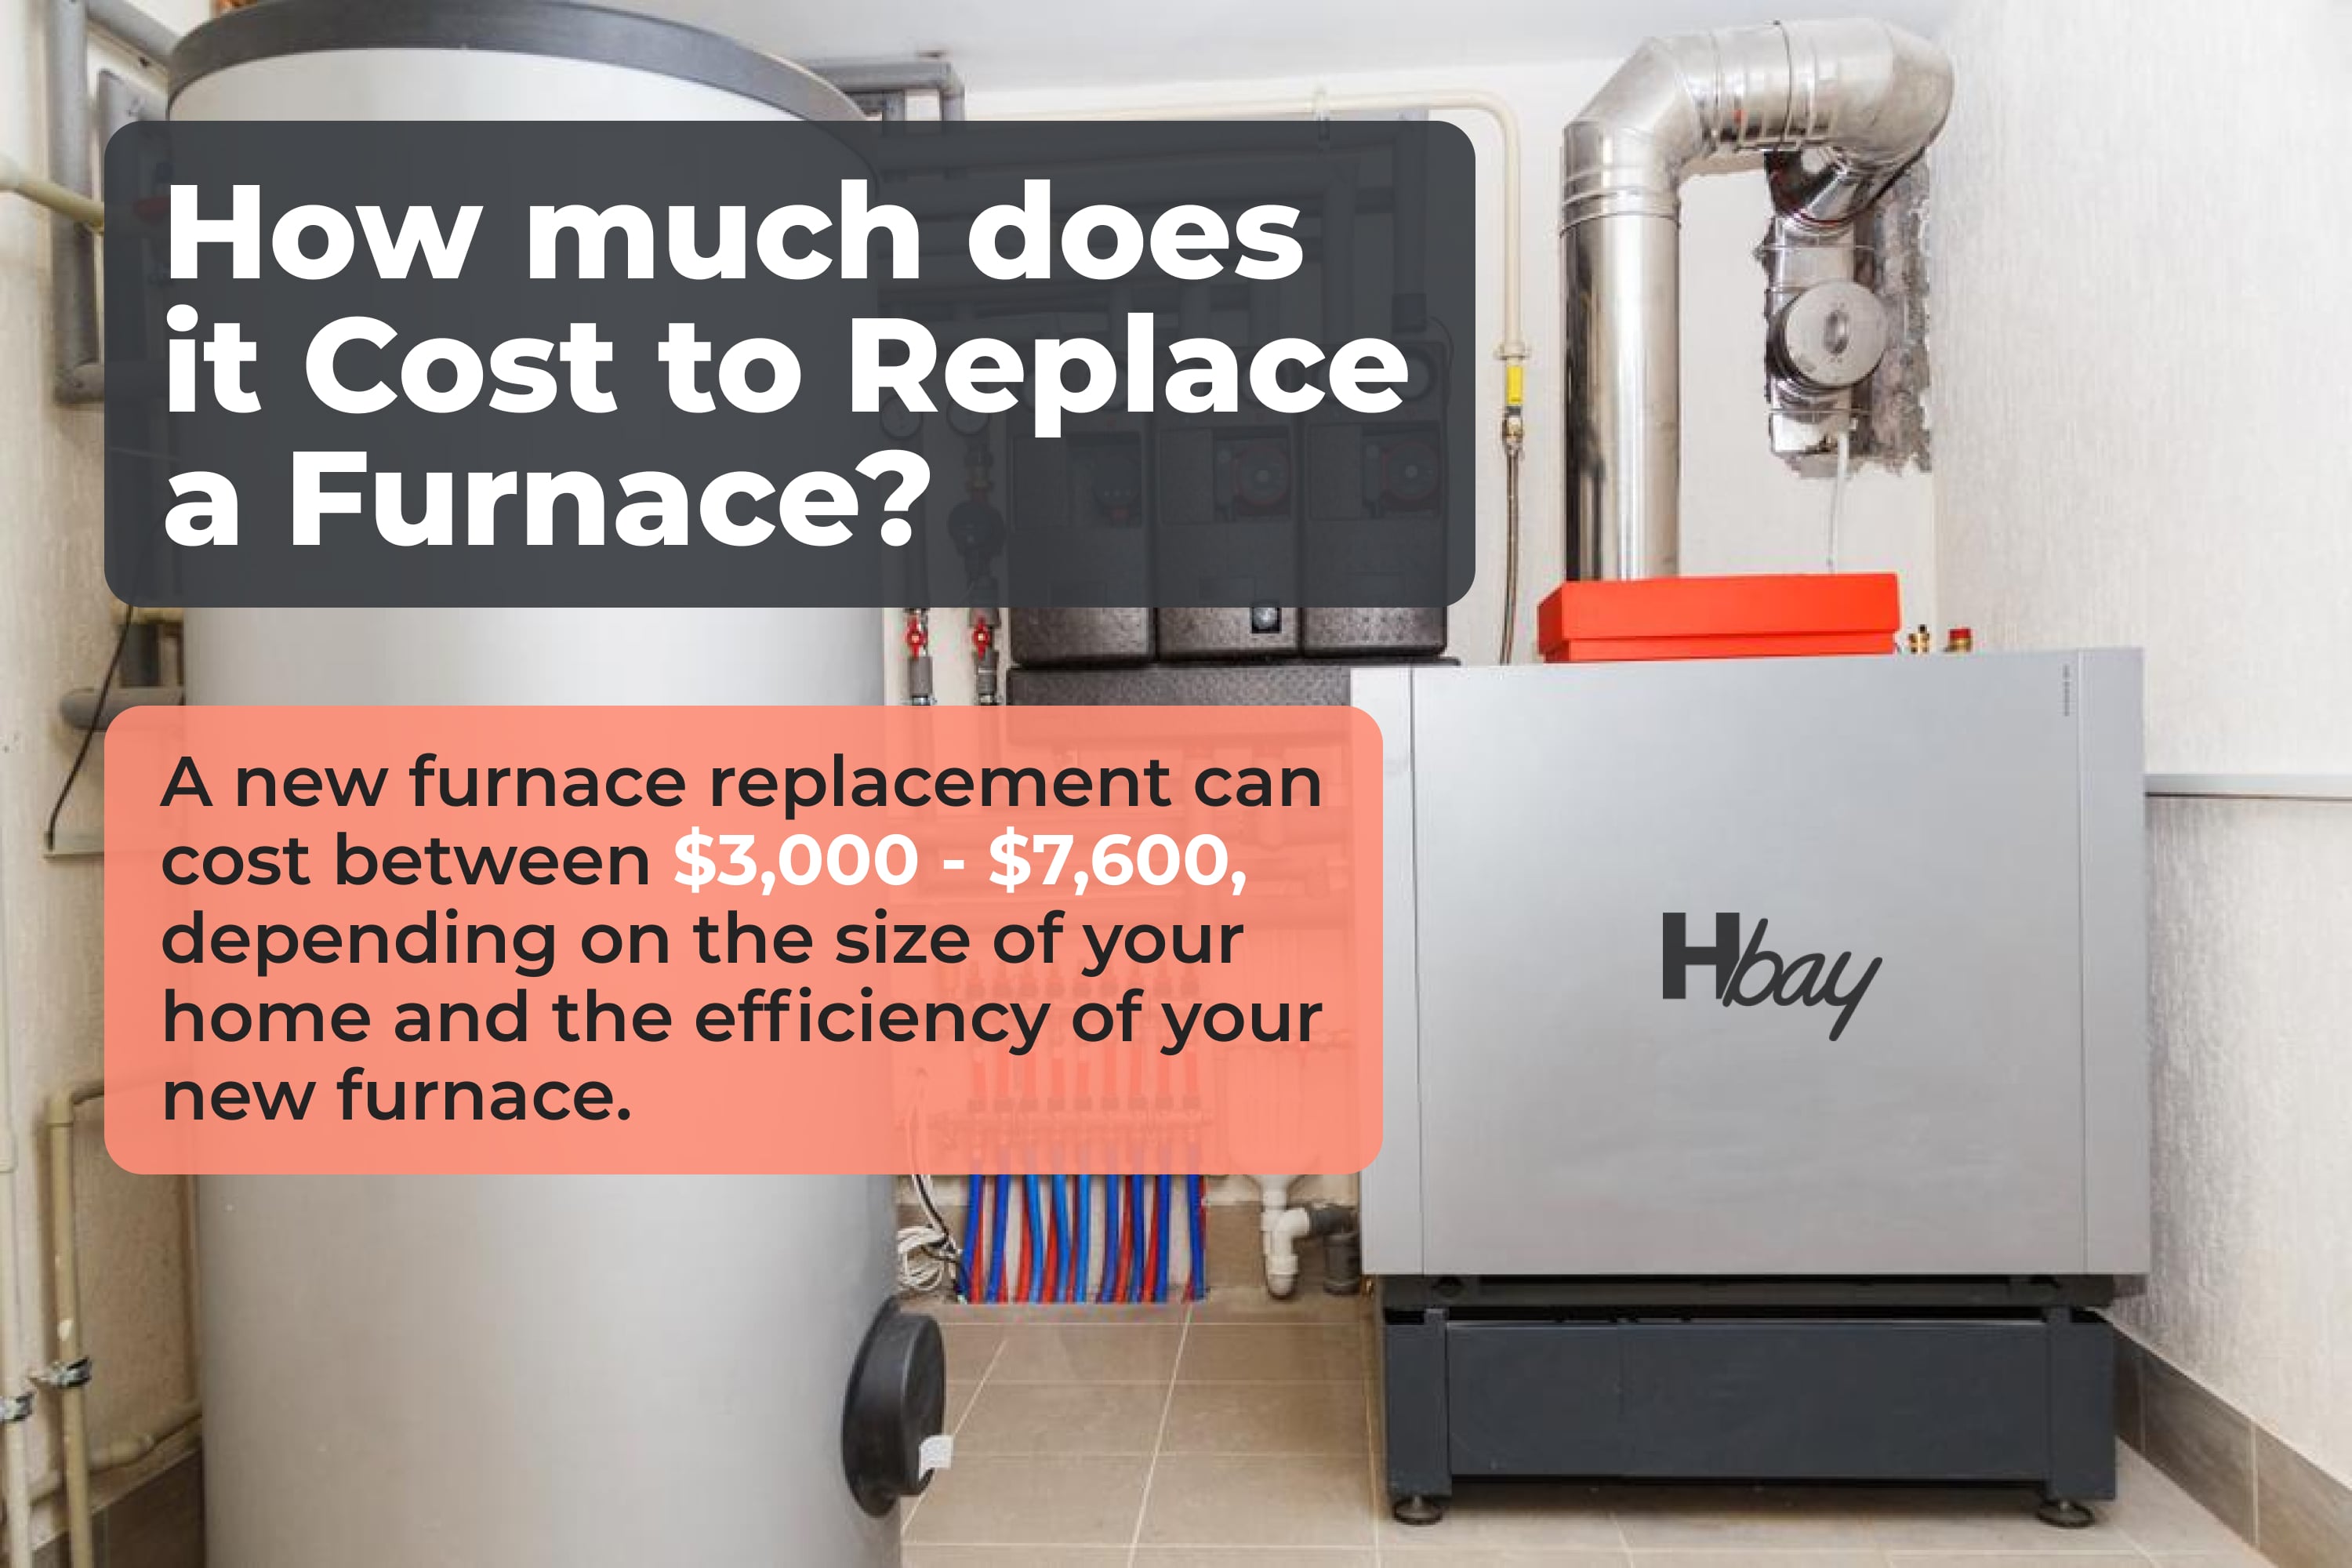 How much does it cost to replace a furnace